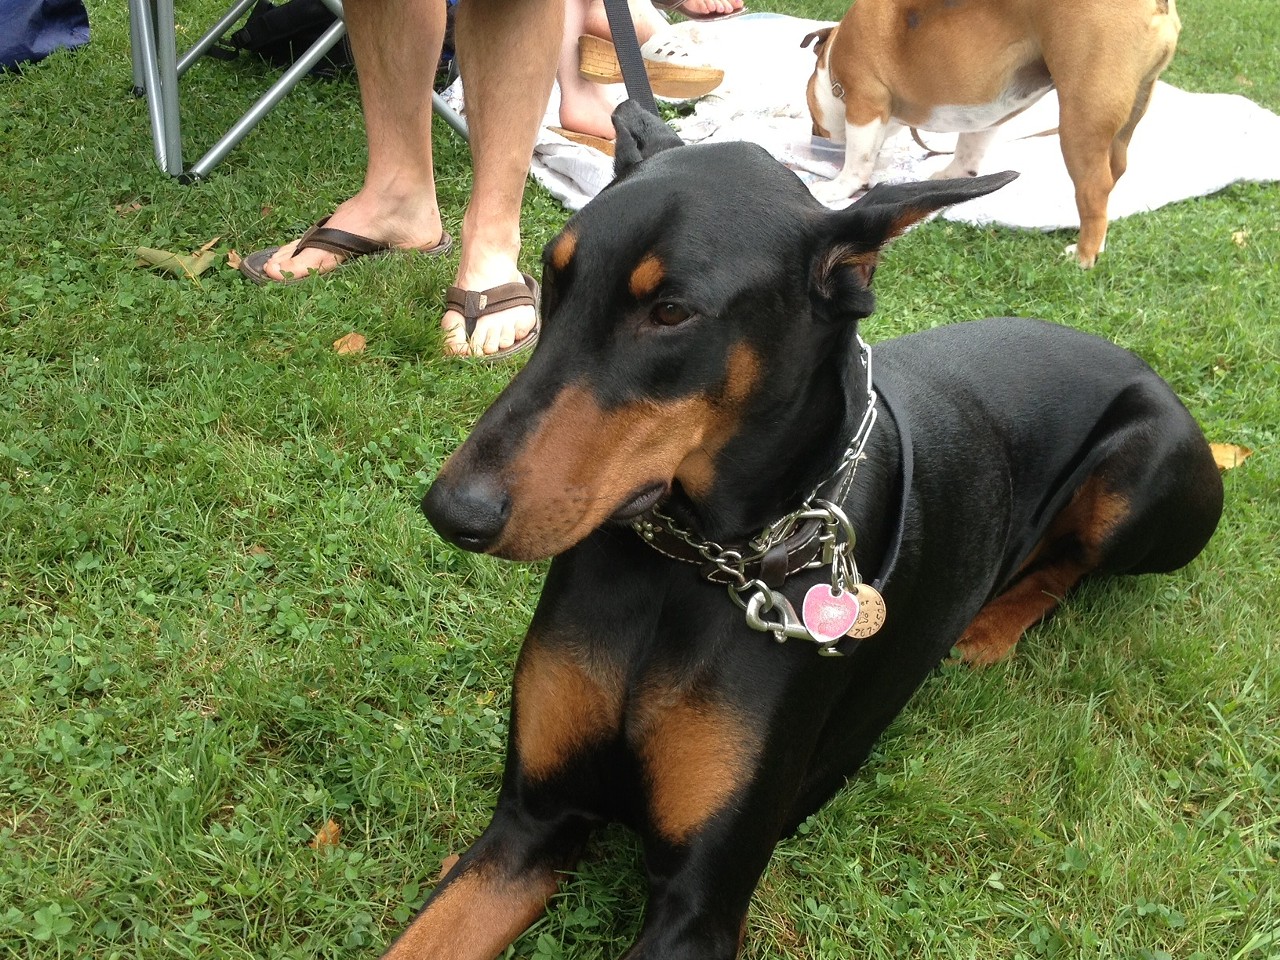 PHOTOS: The Most Adorable Pooches Spotted Yesterday at Ale Fest